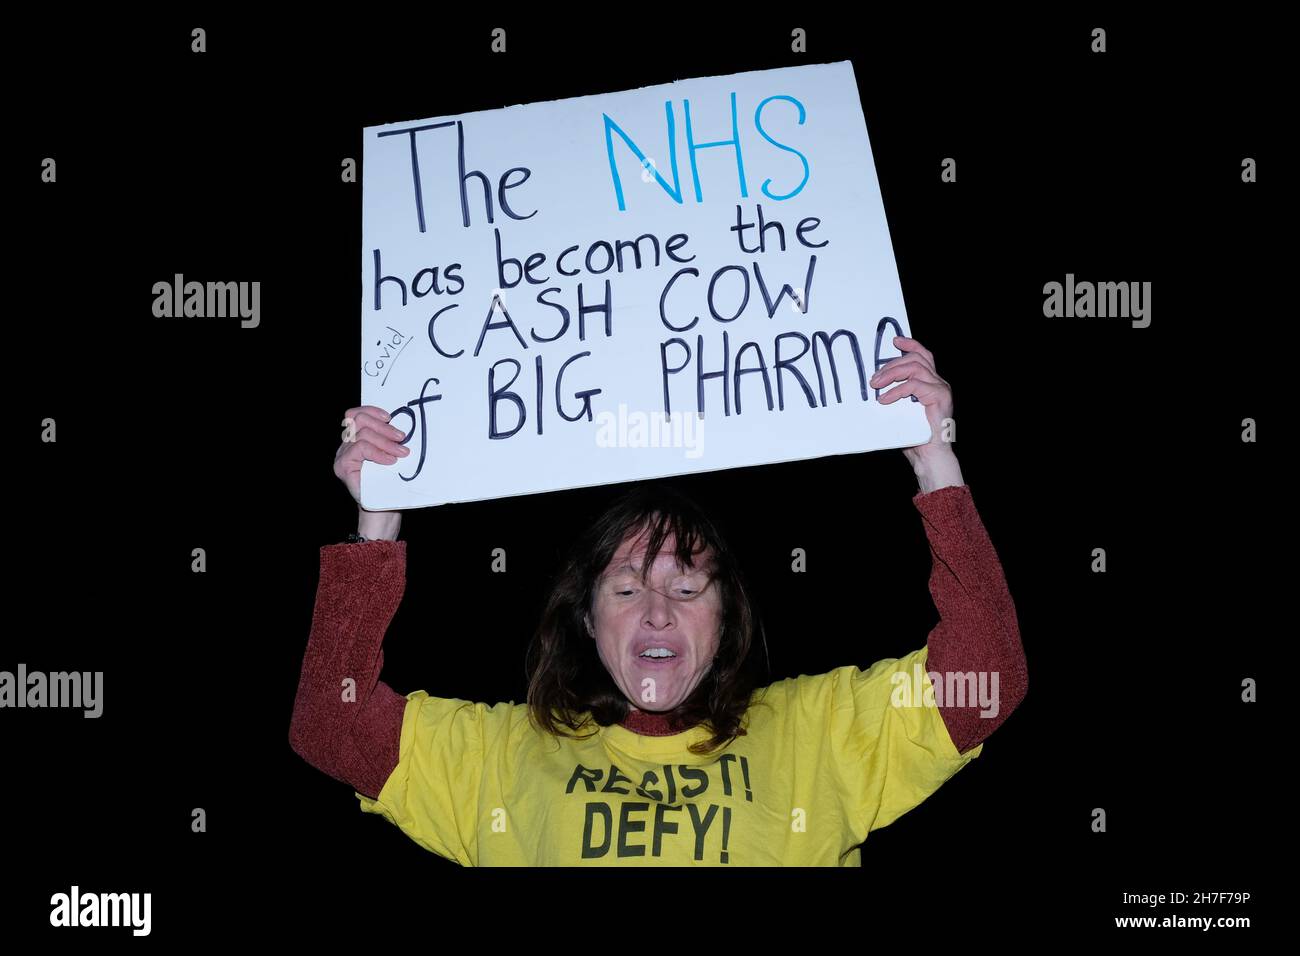 London, UK, 22nd Nov, 2021. A anti-vaccine counter-protester holds up a banner at a Unite Union protest rally in Whitehall, held ahead of the Health and Care Bill's third reading and vote in parliament. The union which represents 100,000 health care workers rejects the bill as they argue it will allow privatisation, lead to cuts, and will not allow proper scrutiny of contracts awarded. Credit: Eleventh Hour Photography/Alamy Live News Stock Photo